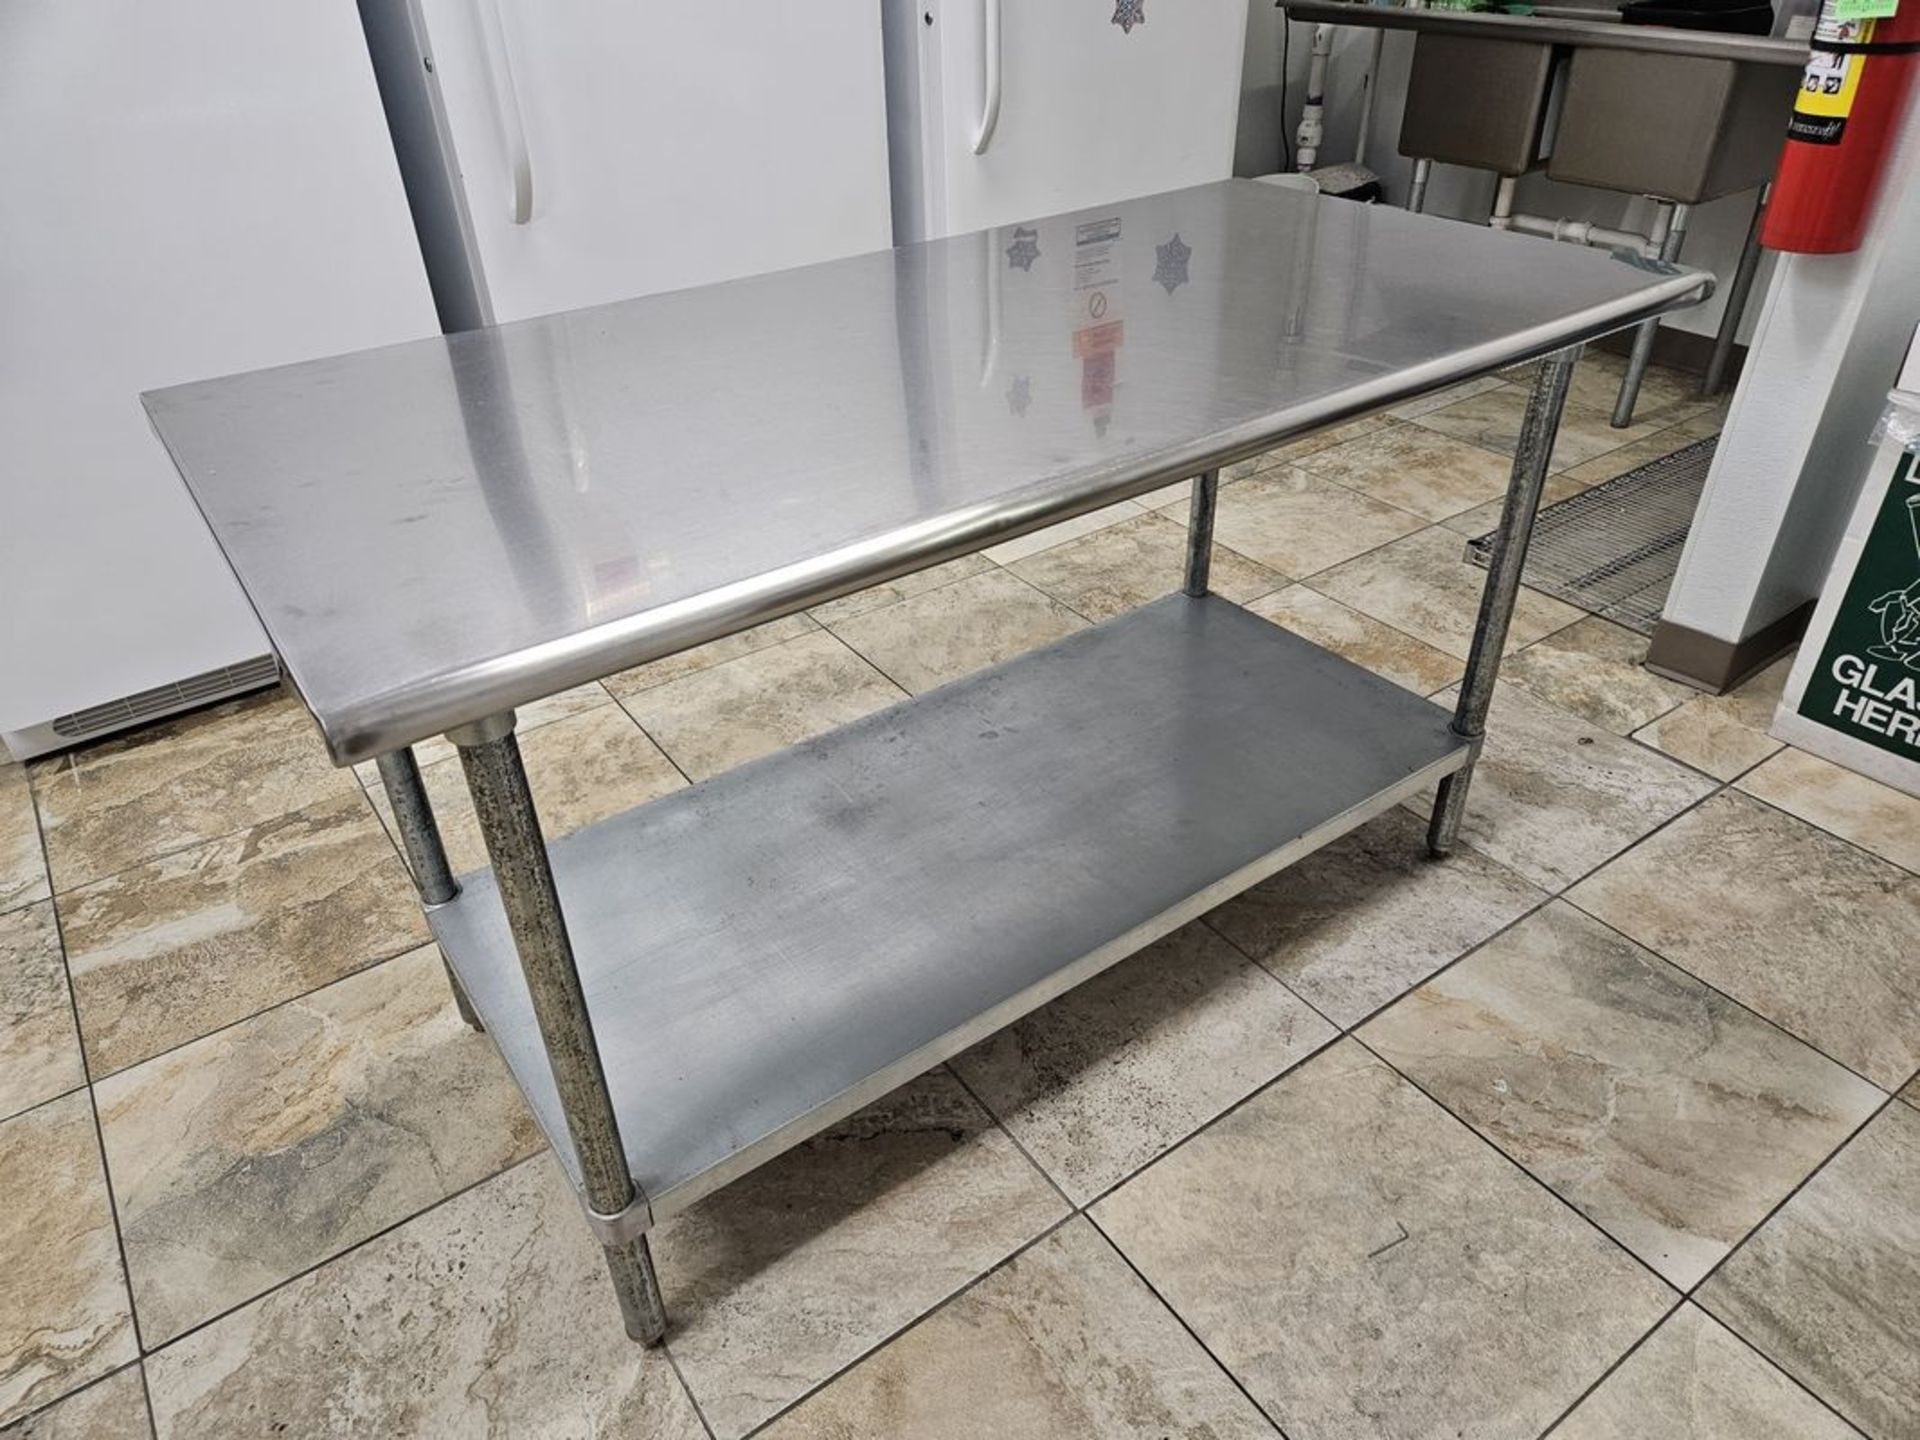 30" x 60" Stainless Steel Work Table